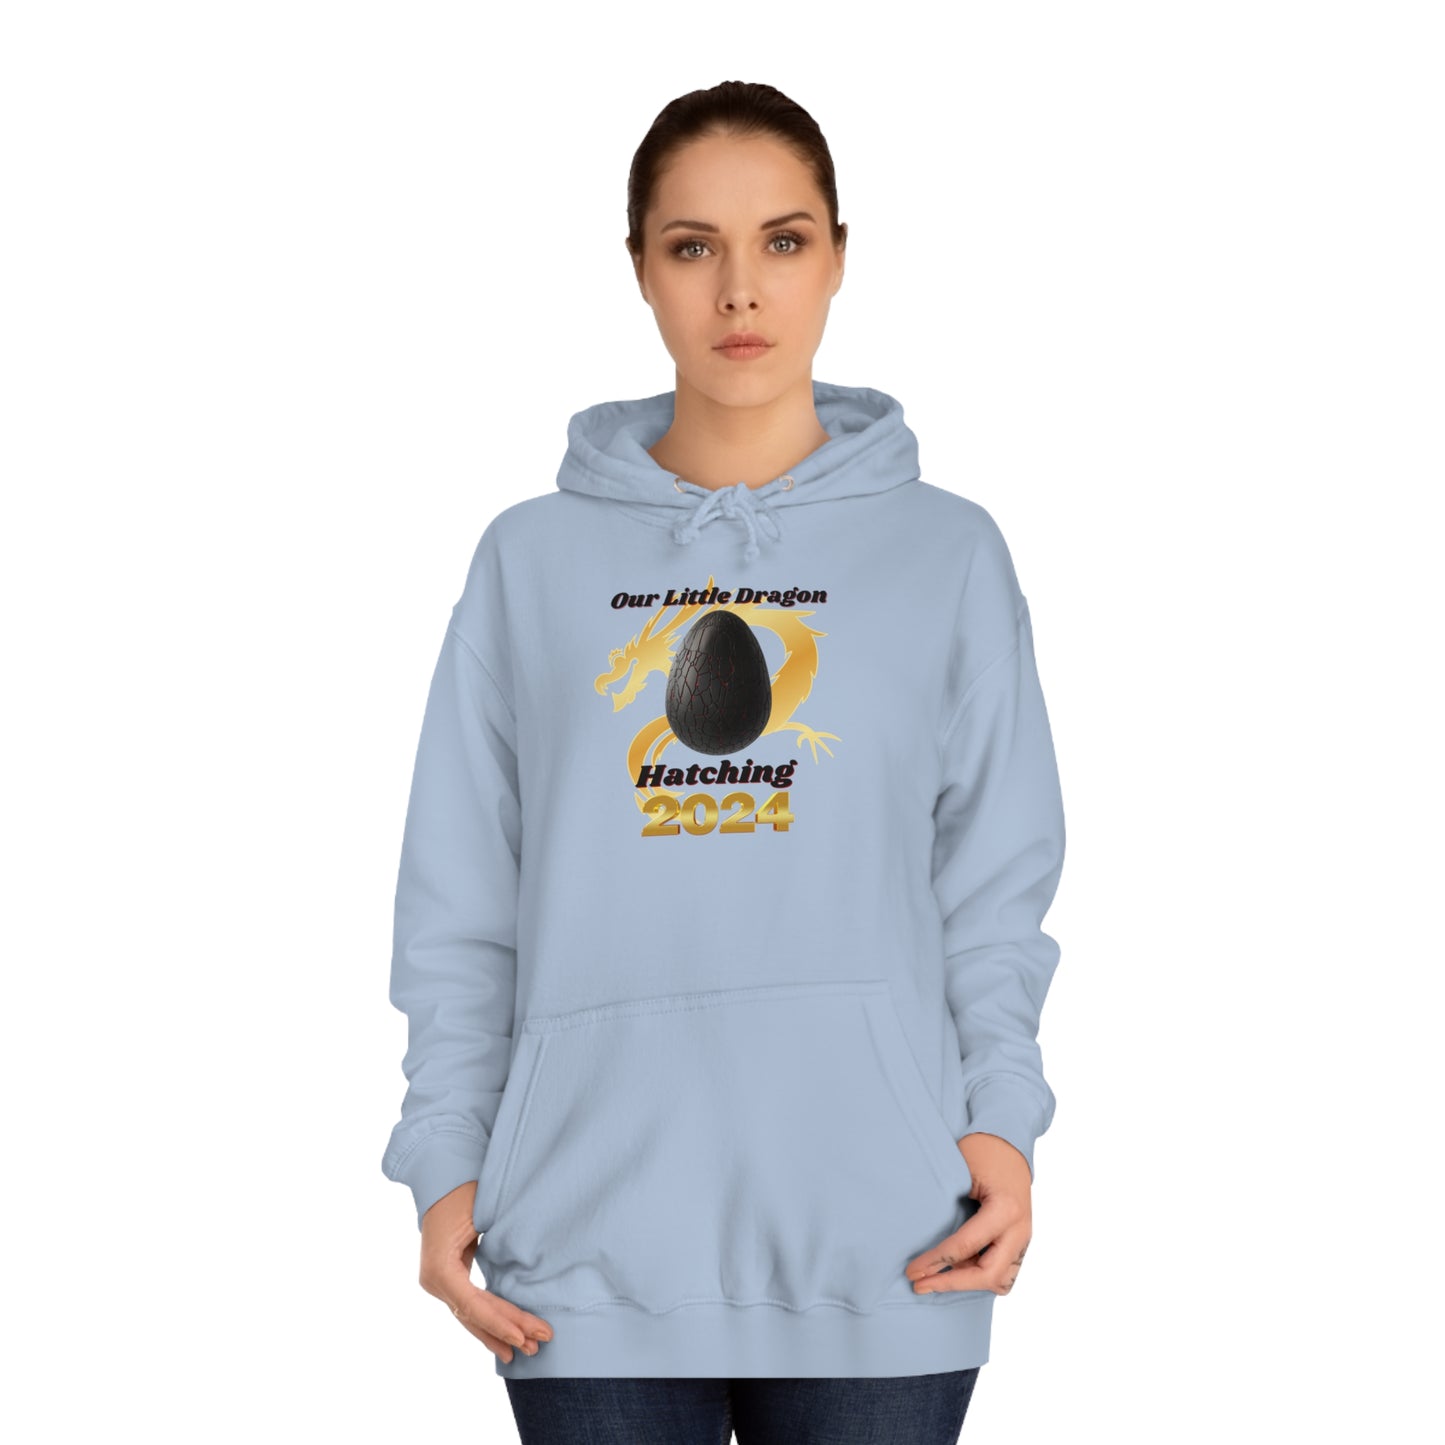 Our Little Dragon Hatching 2024 Unisex College Hoodie